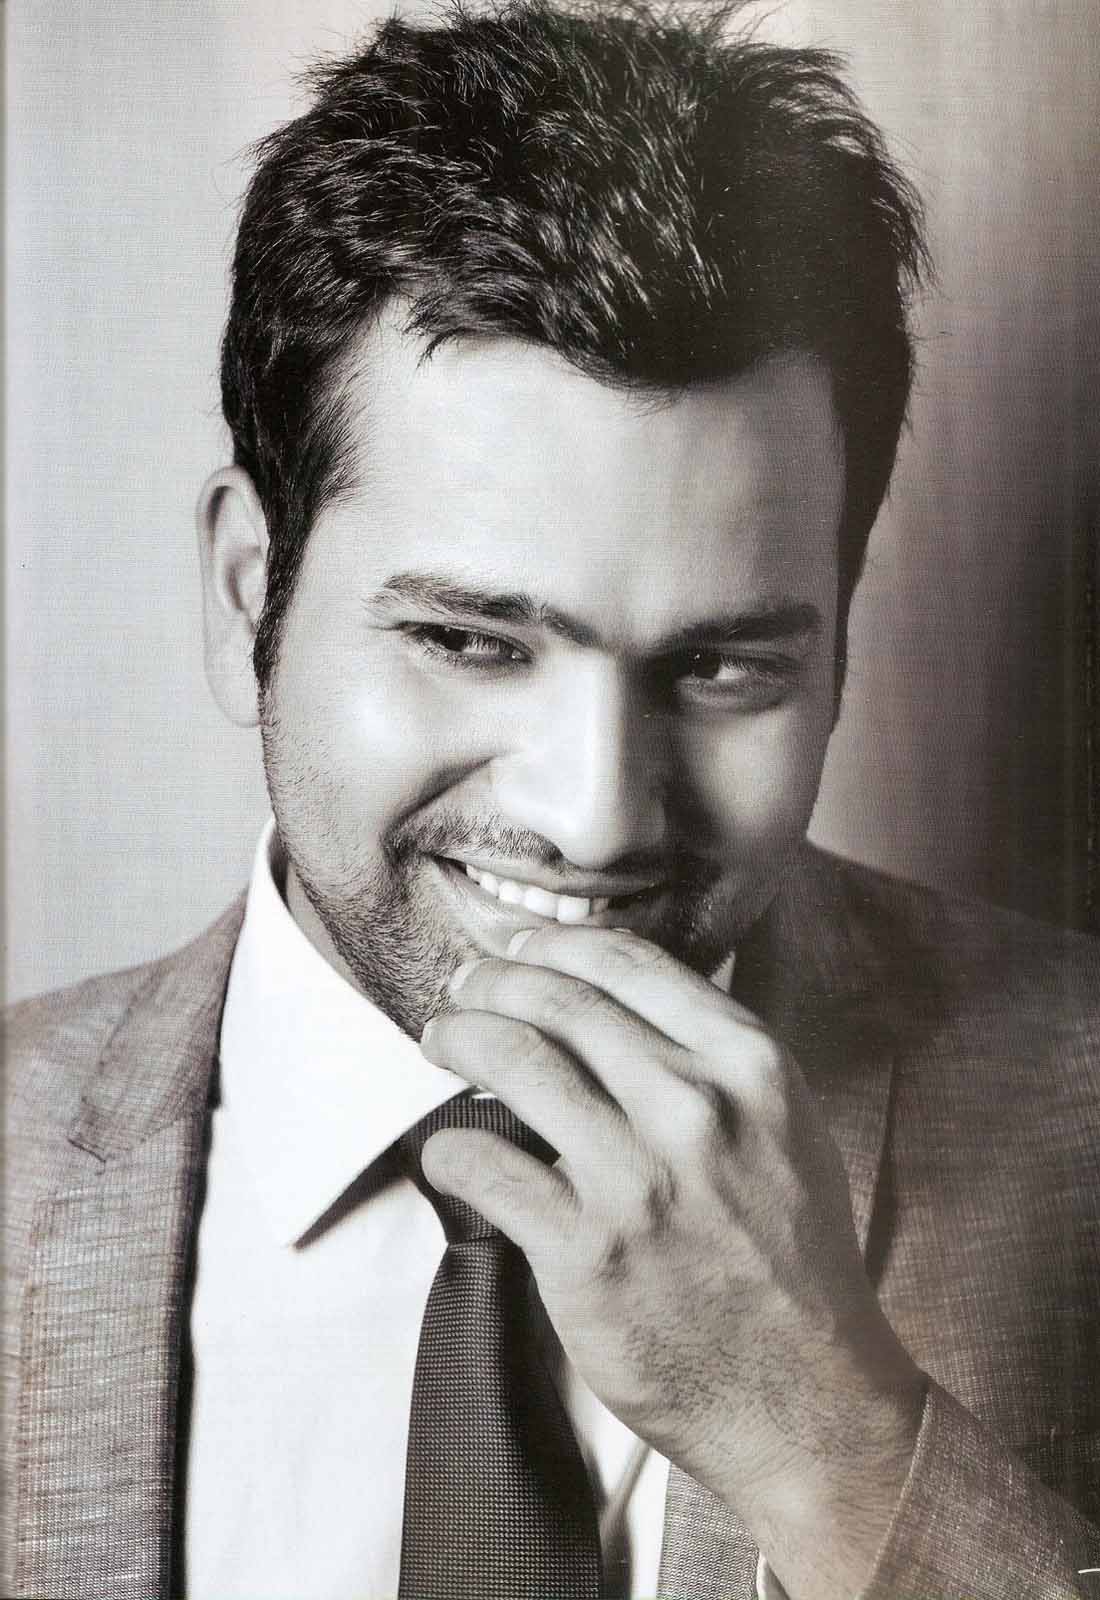 Rohit Sharma Good Look In Black And White Image - Hd Wallpapers Rohit Sharma  Hd - 1100x1600 Wallpaper 